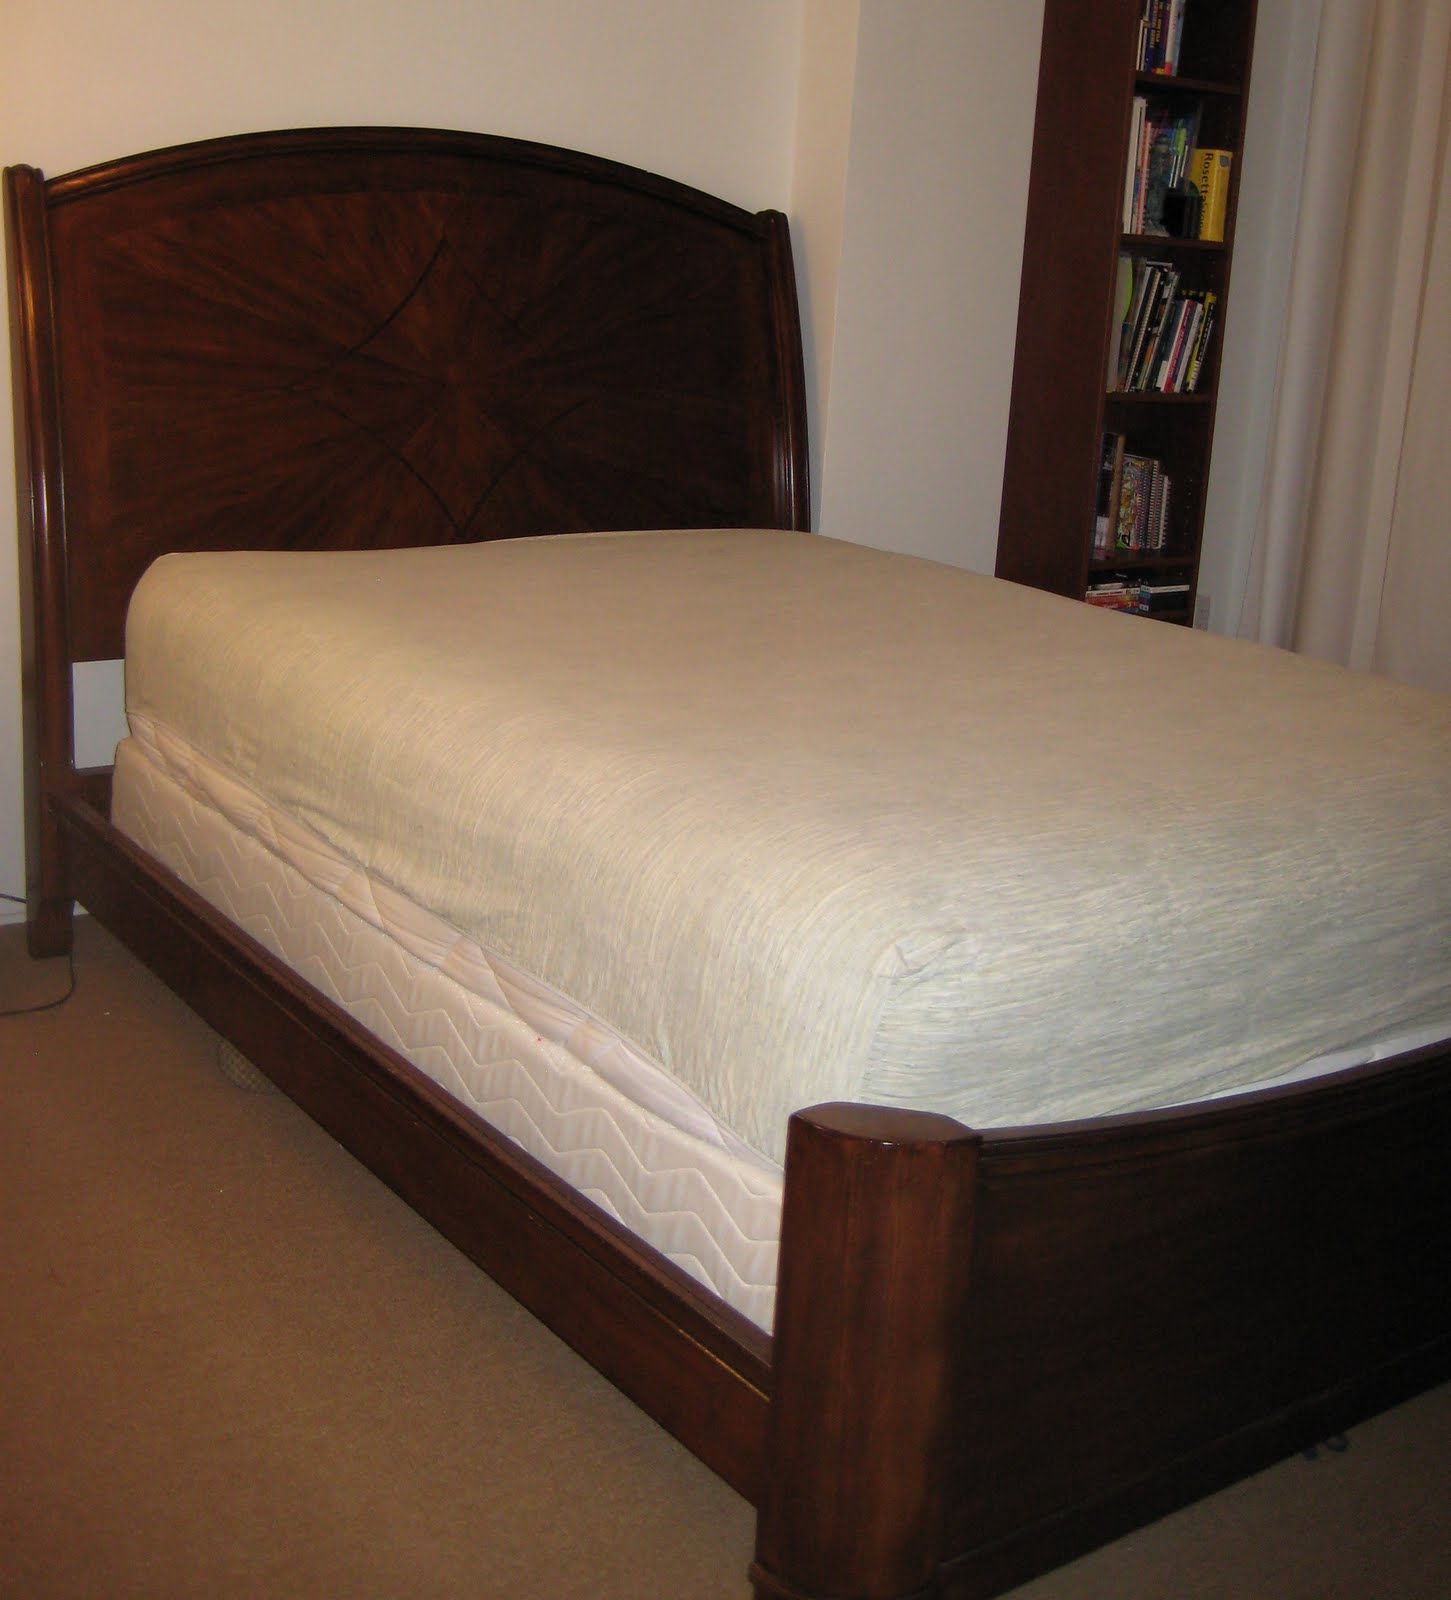 bibi moves: Queen Bed Frame